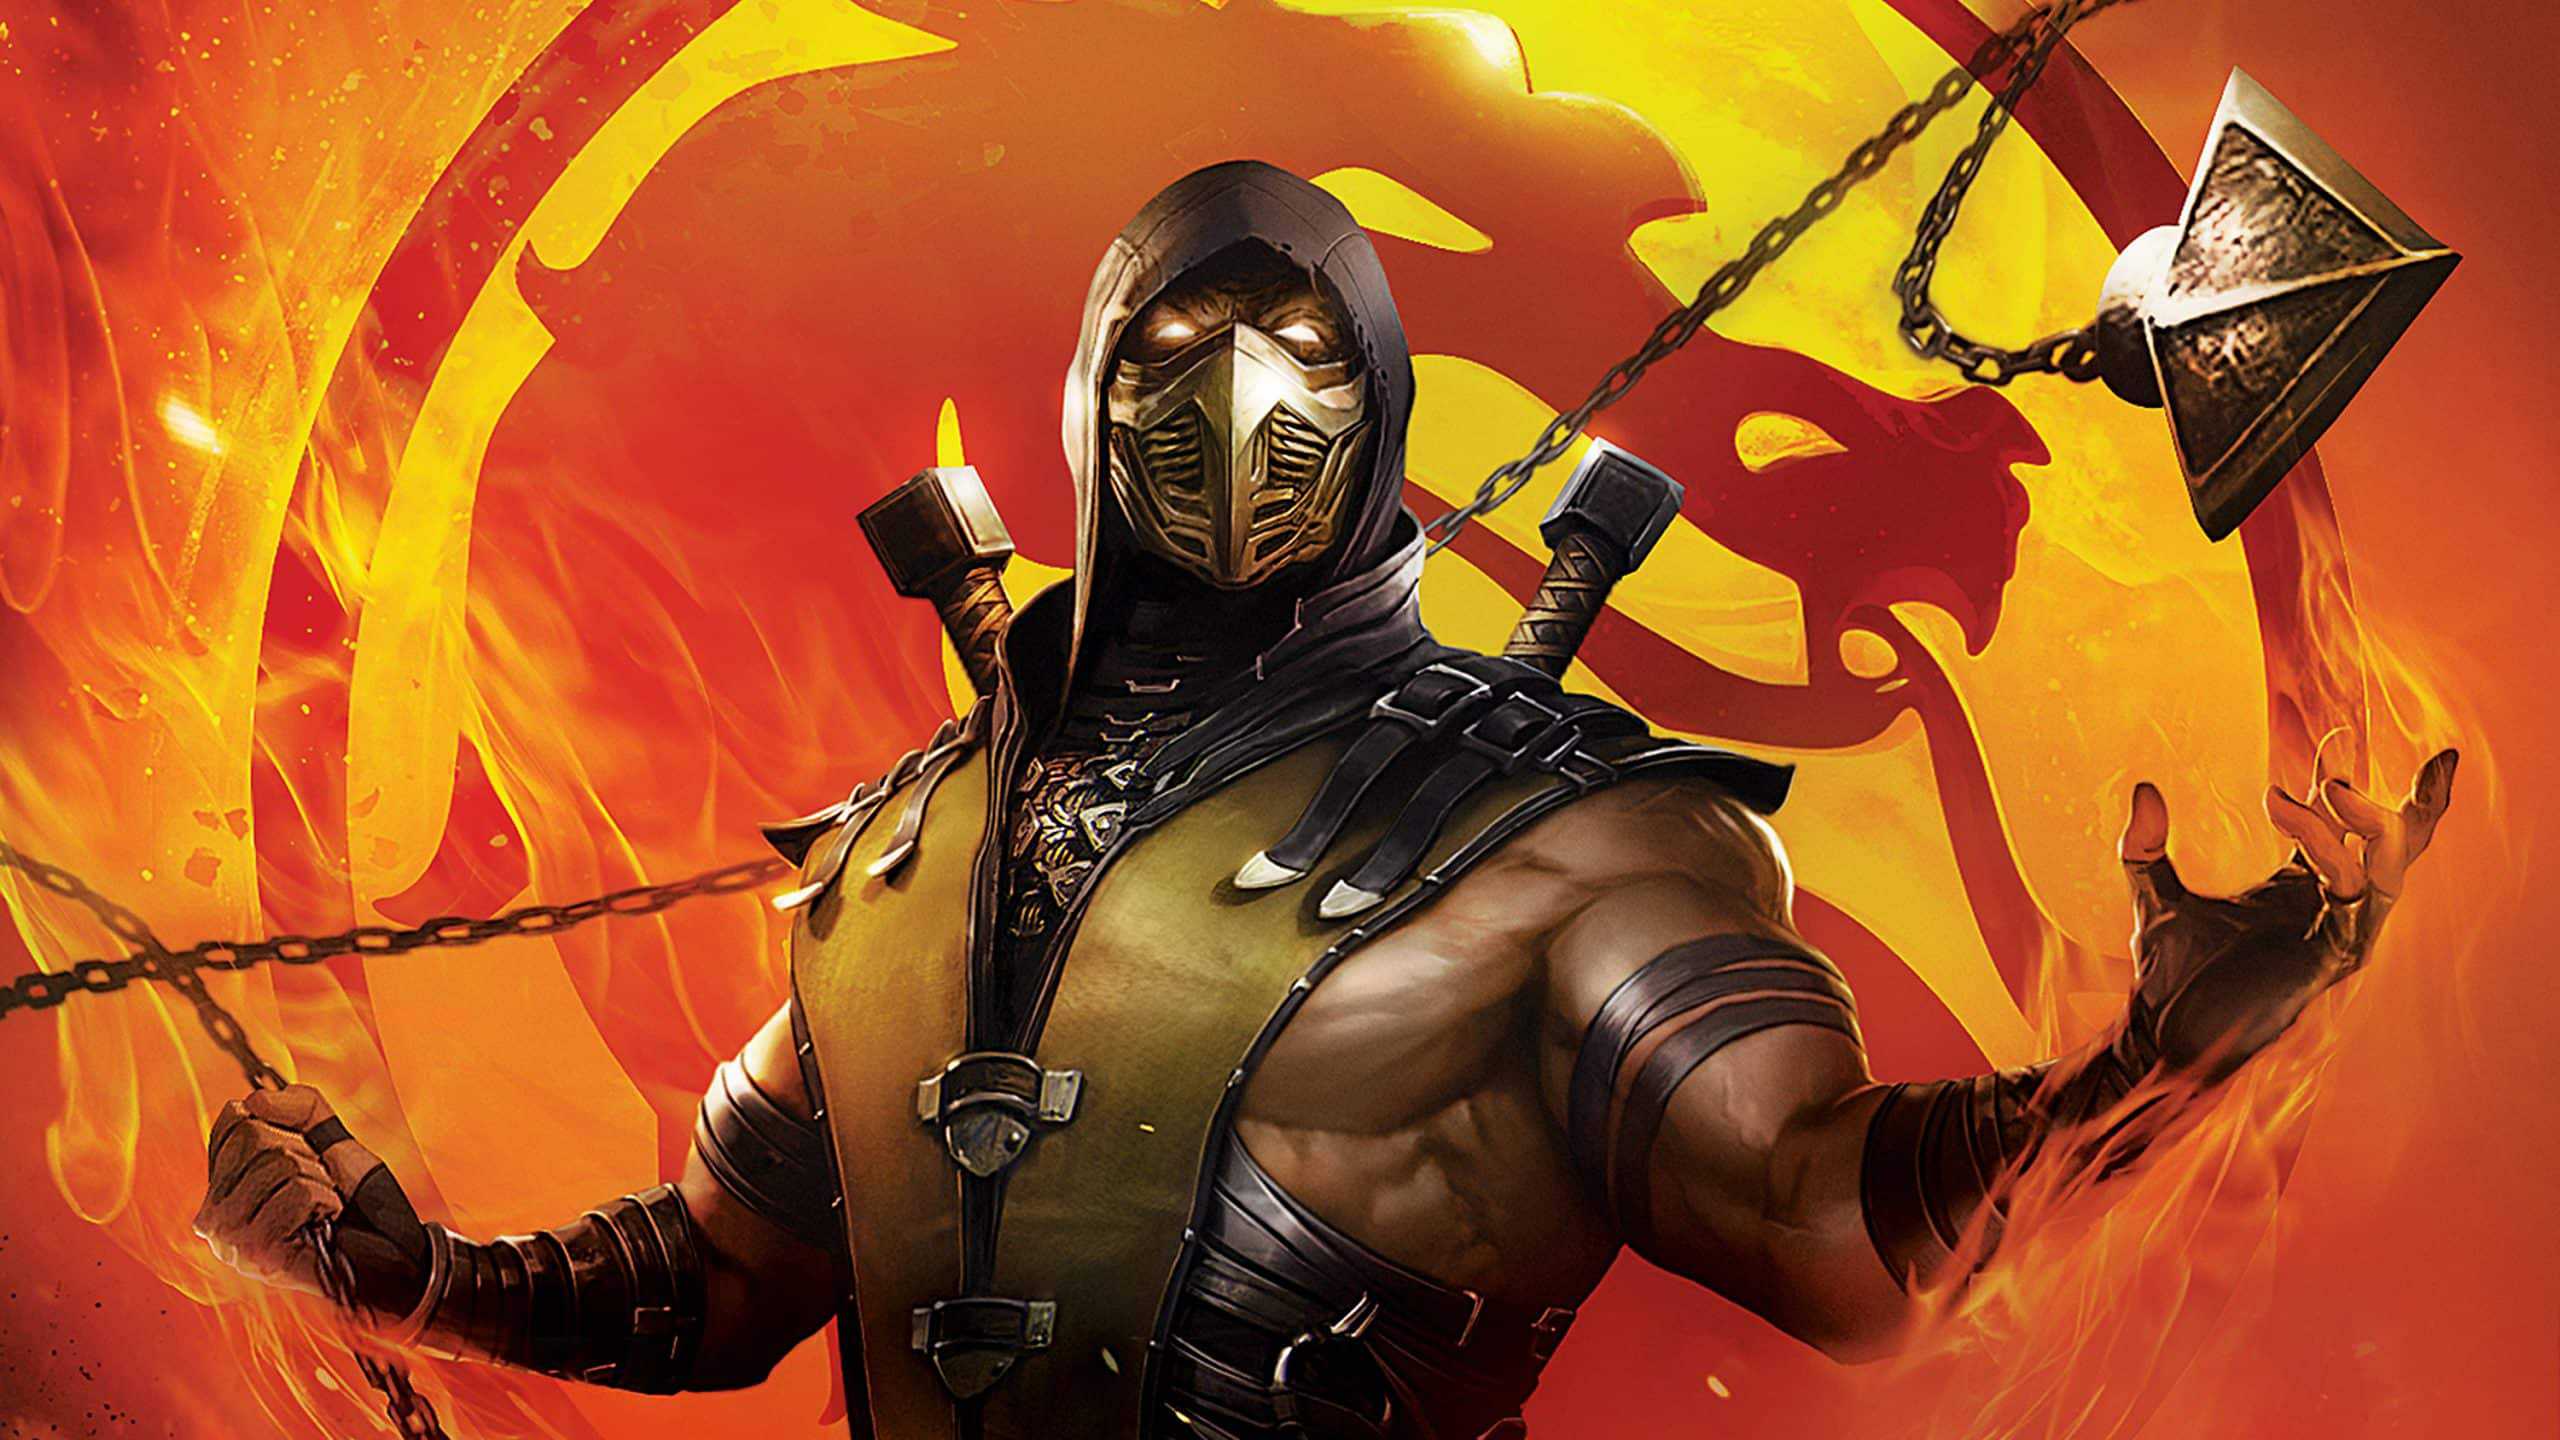 TheOneBeing on X: Now that the news of upcoming Mortal Kombat 12 have  supposedly leaked, who do you think will be on the cover of the game? And  who would you like